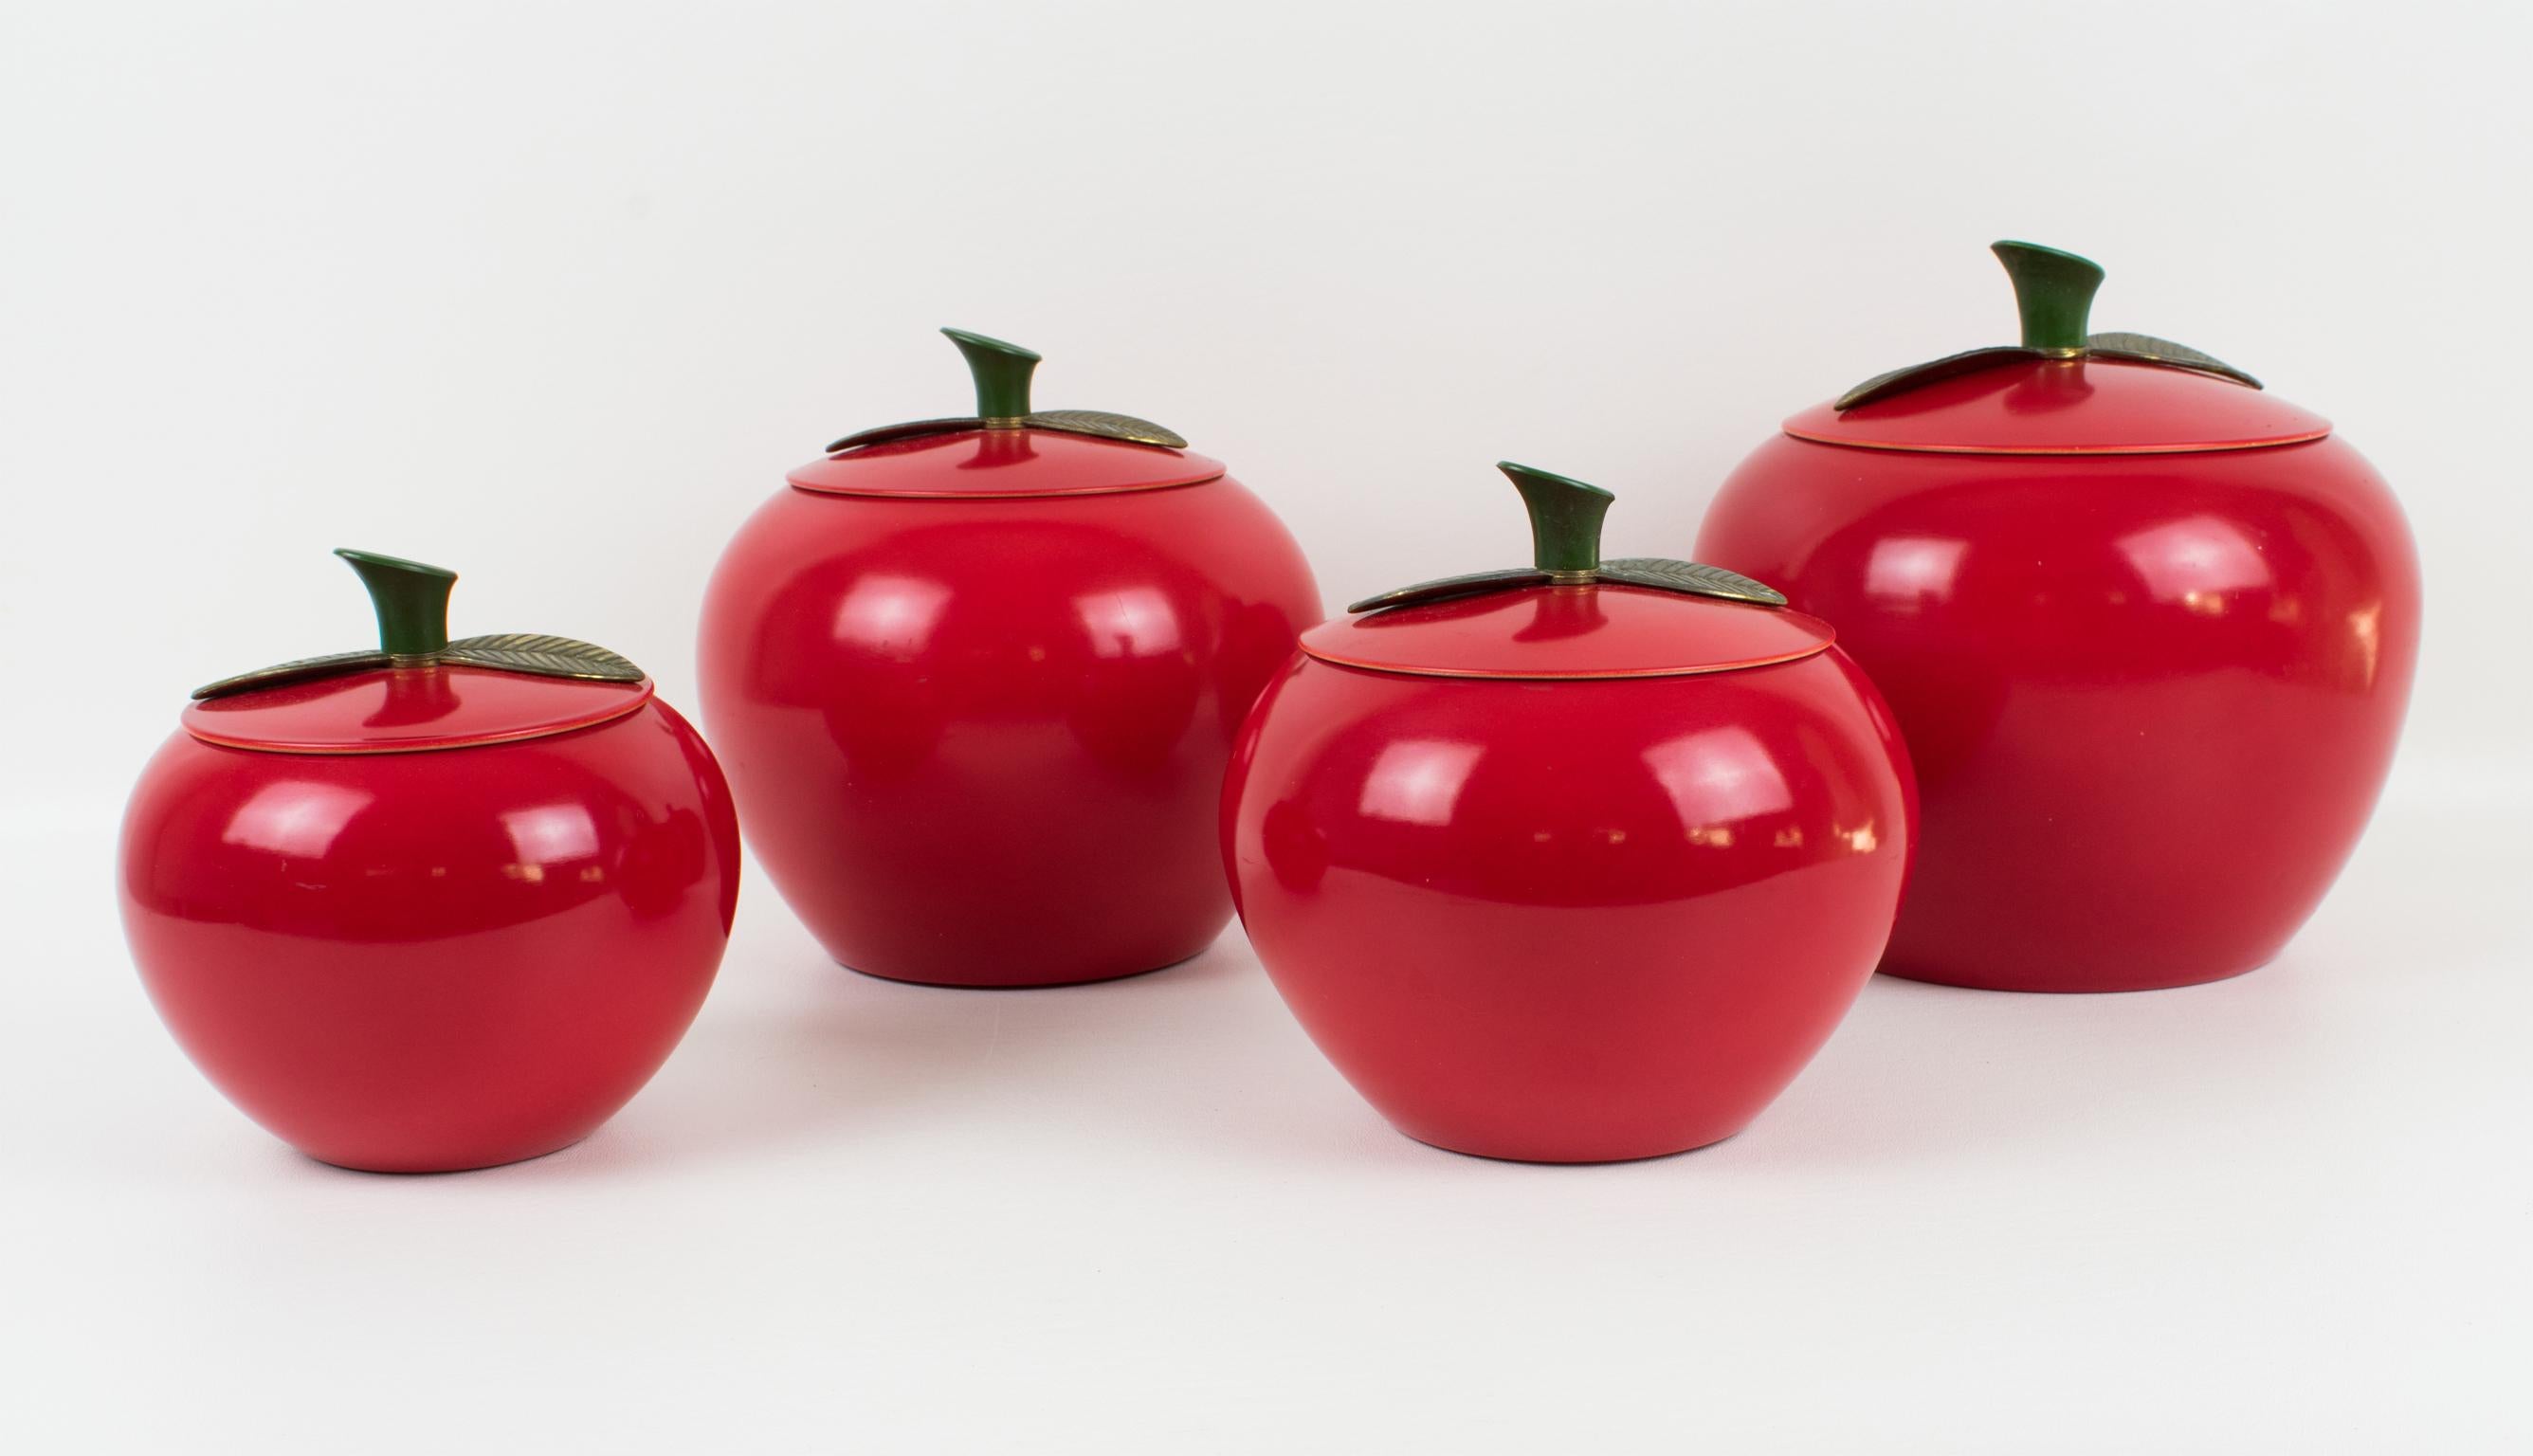 Mid-Century Kitchen Canisters Cookie Jar Red Enamel Aluminum Apple, Set of 4 Pc 8